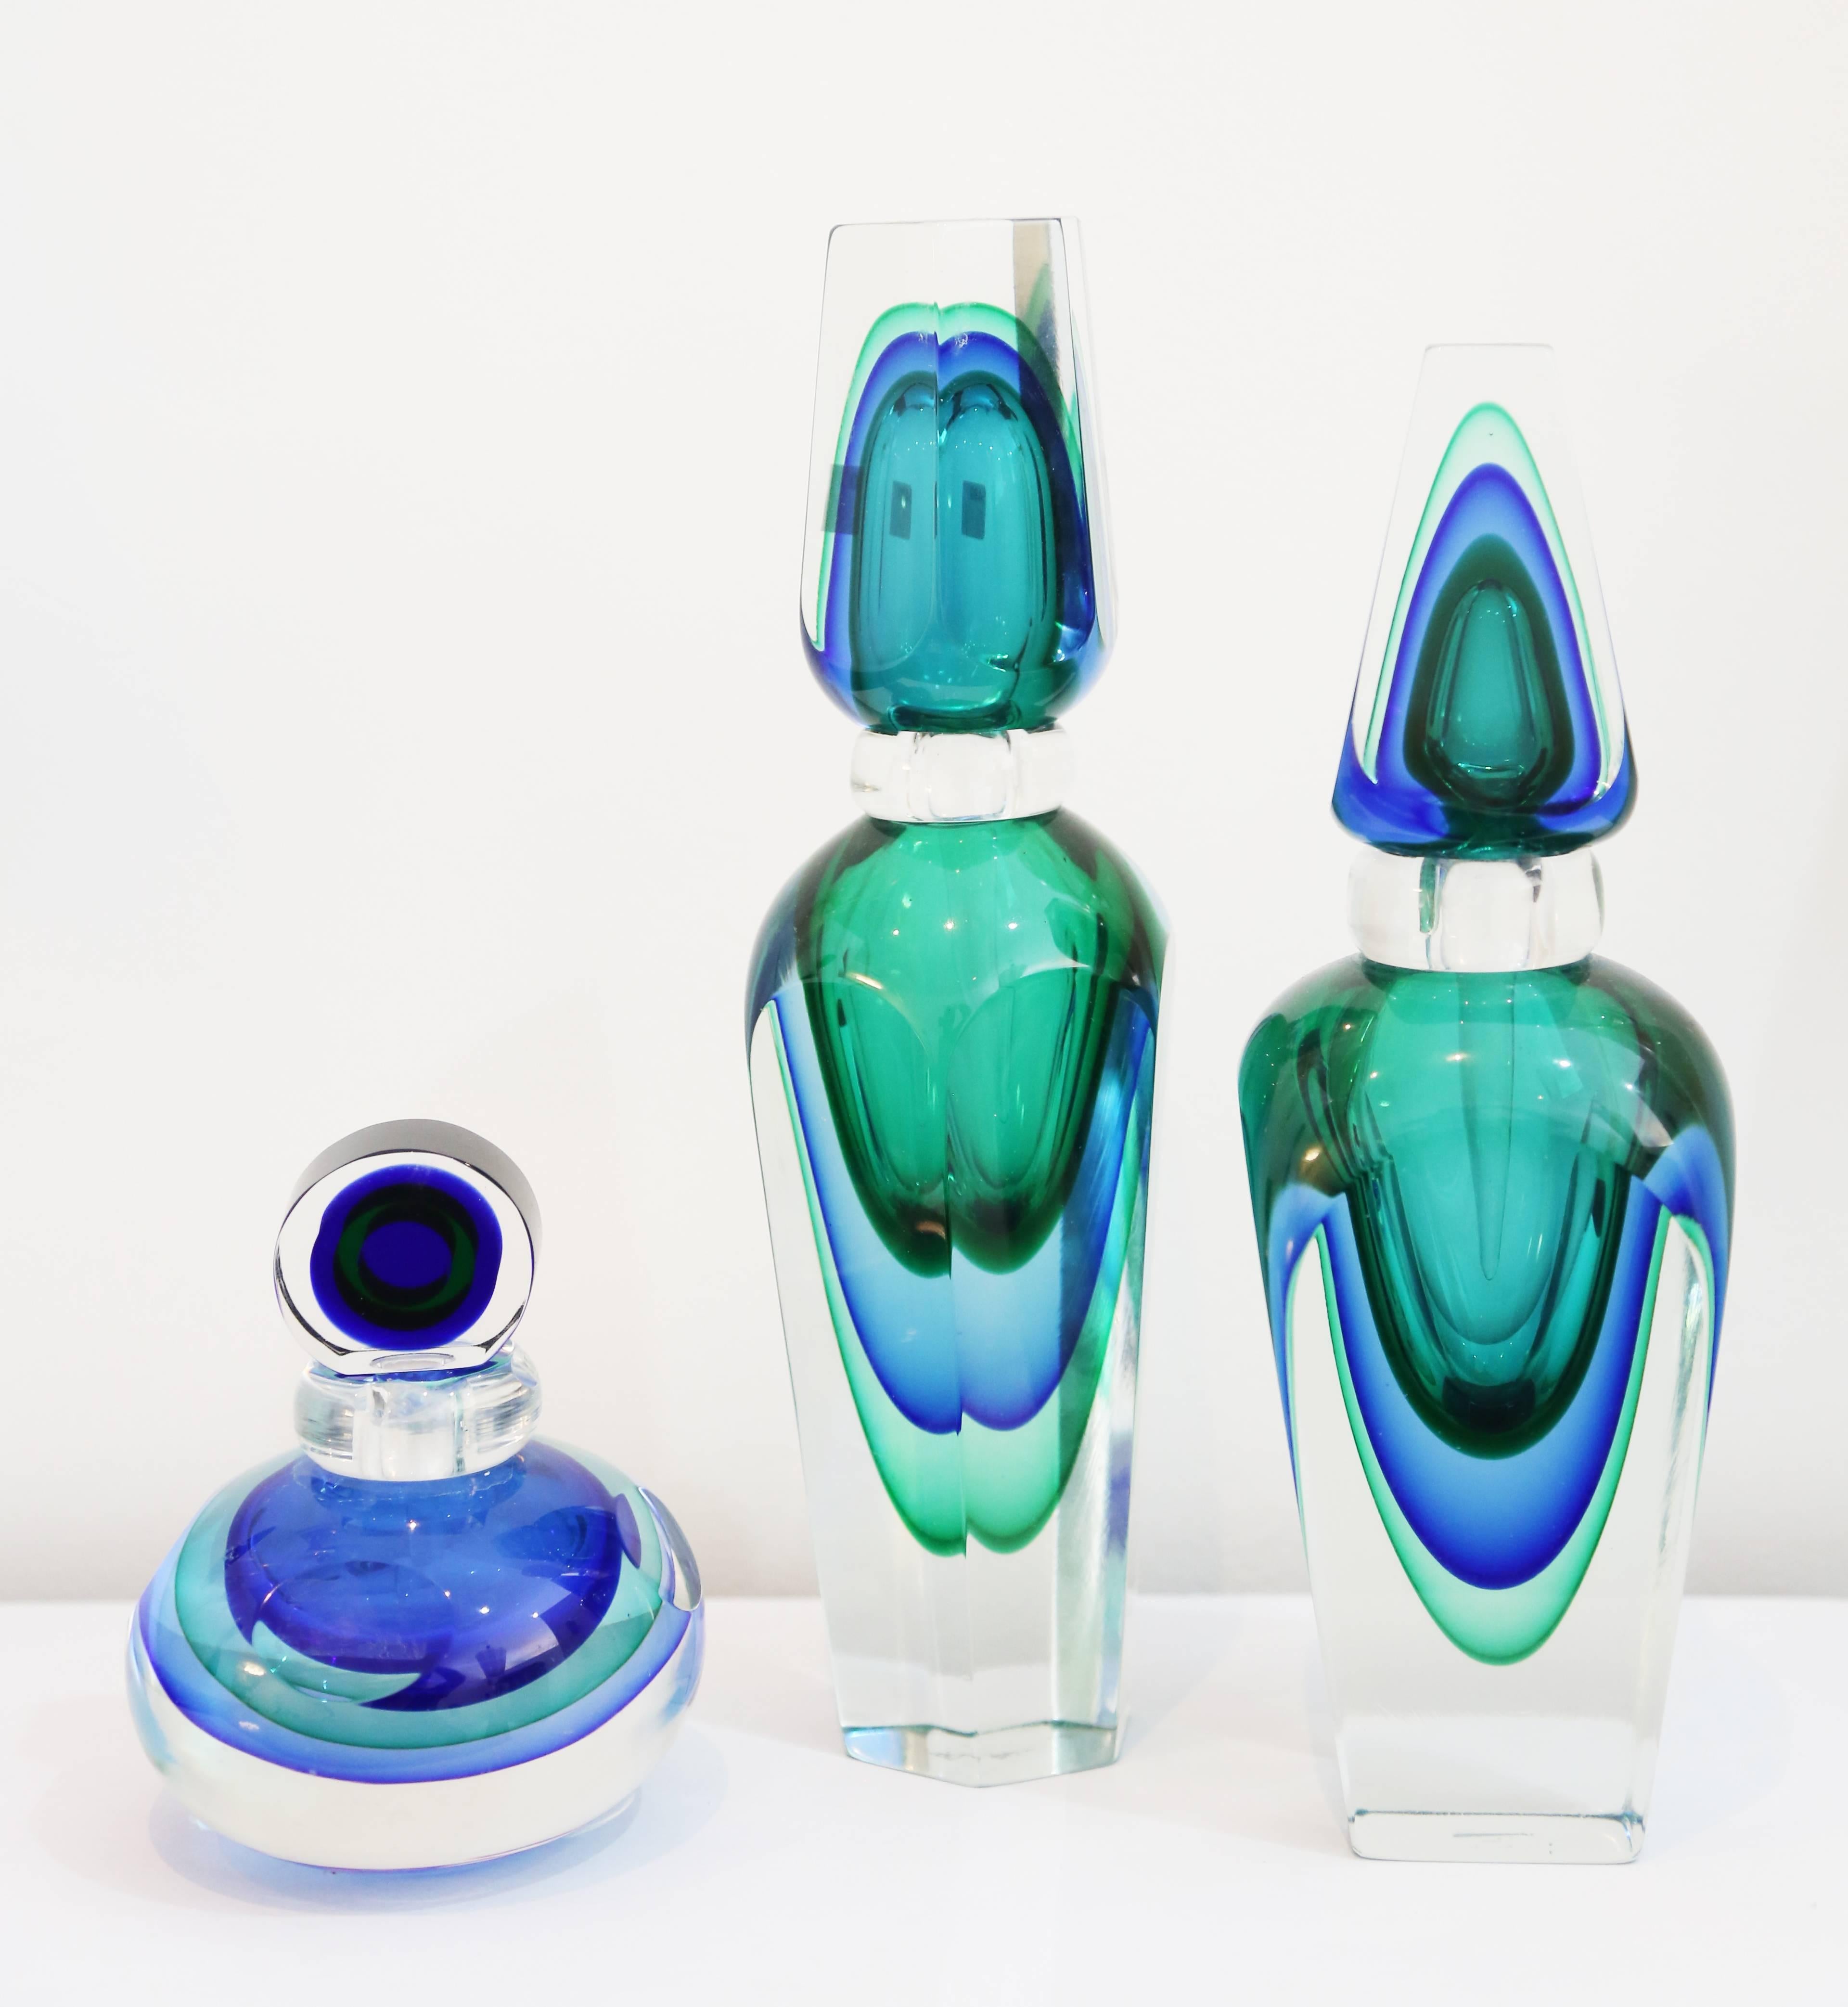 Group of three Murano glass perfume bottles. Very thick glass and great colors.
Measures: 11